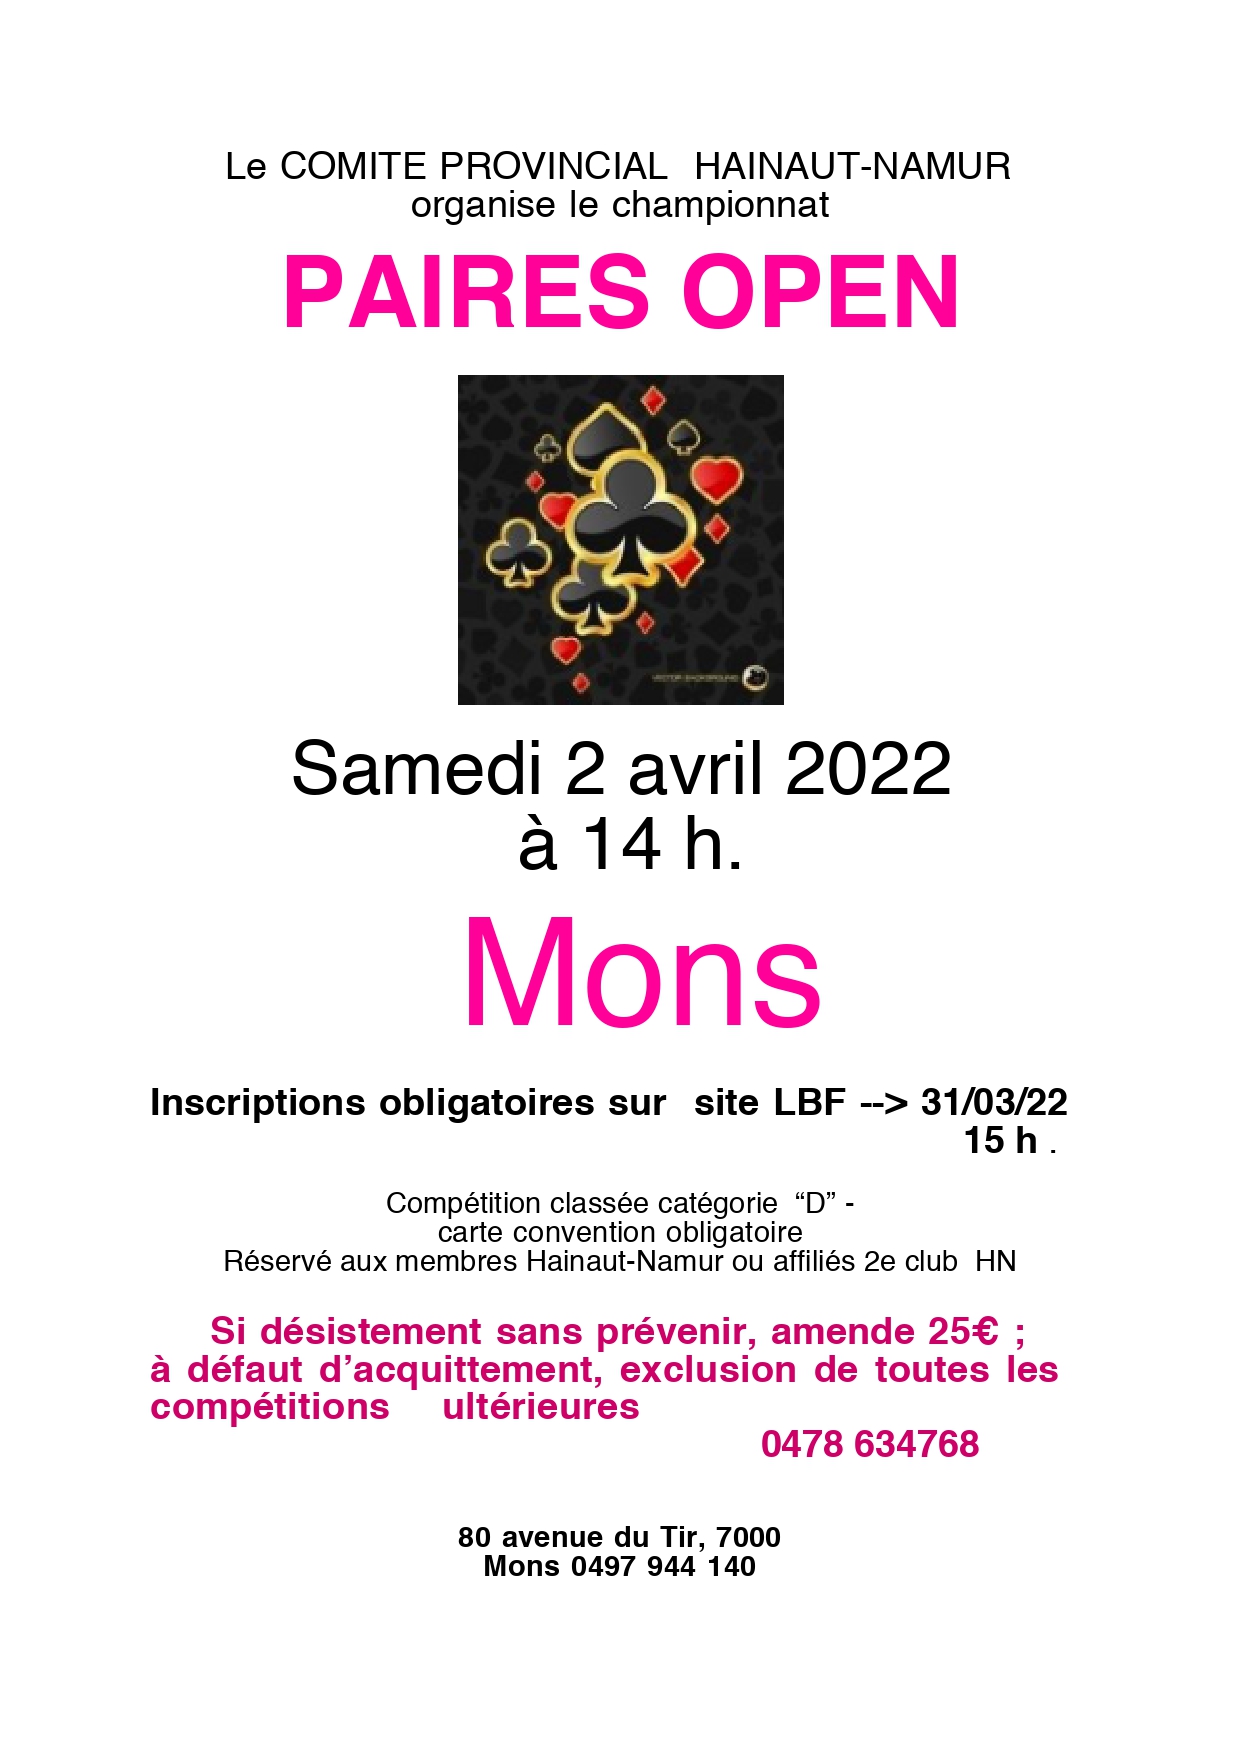 paires-open-2022-hn_page-0001.jpg